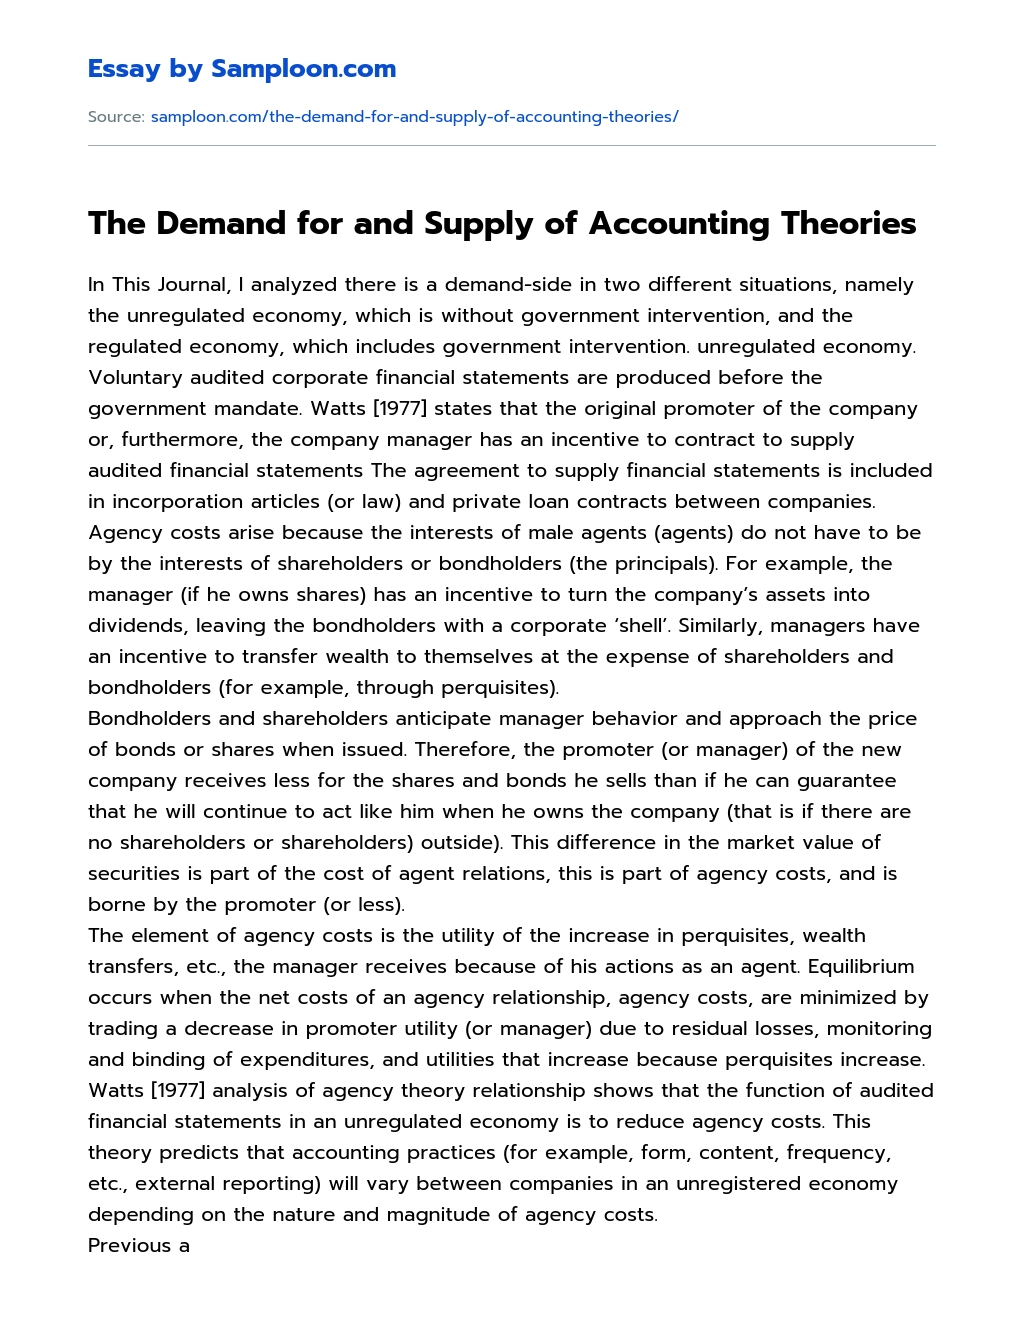 The Demand for and Supply of Accounting Theories essay